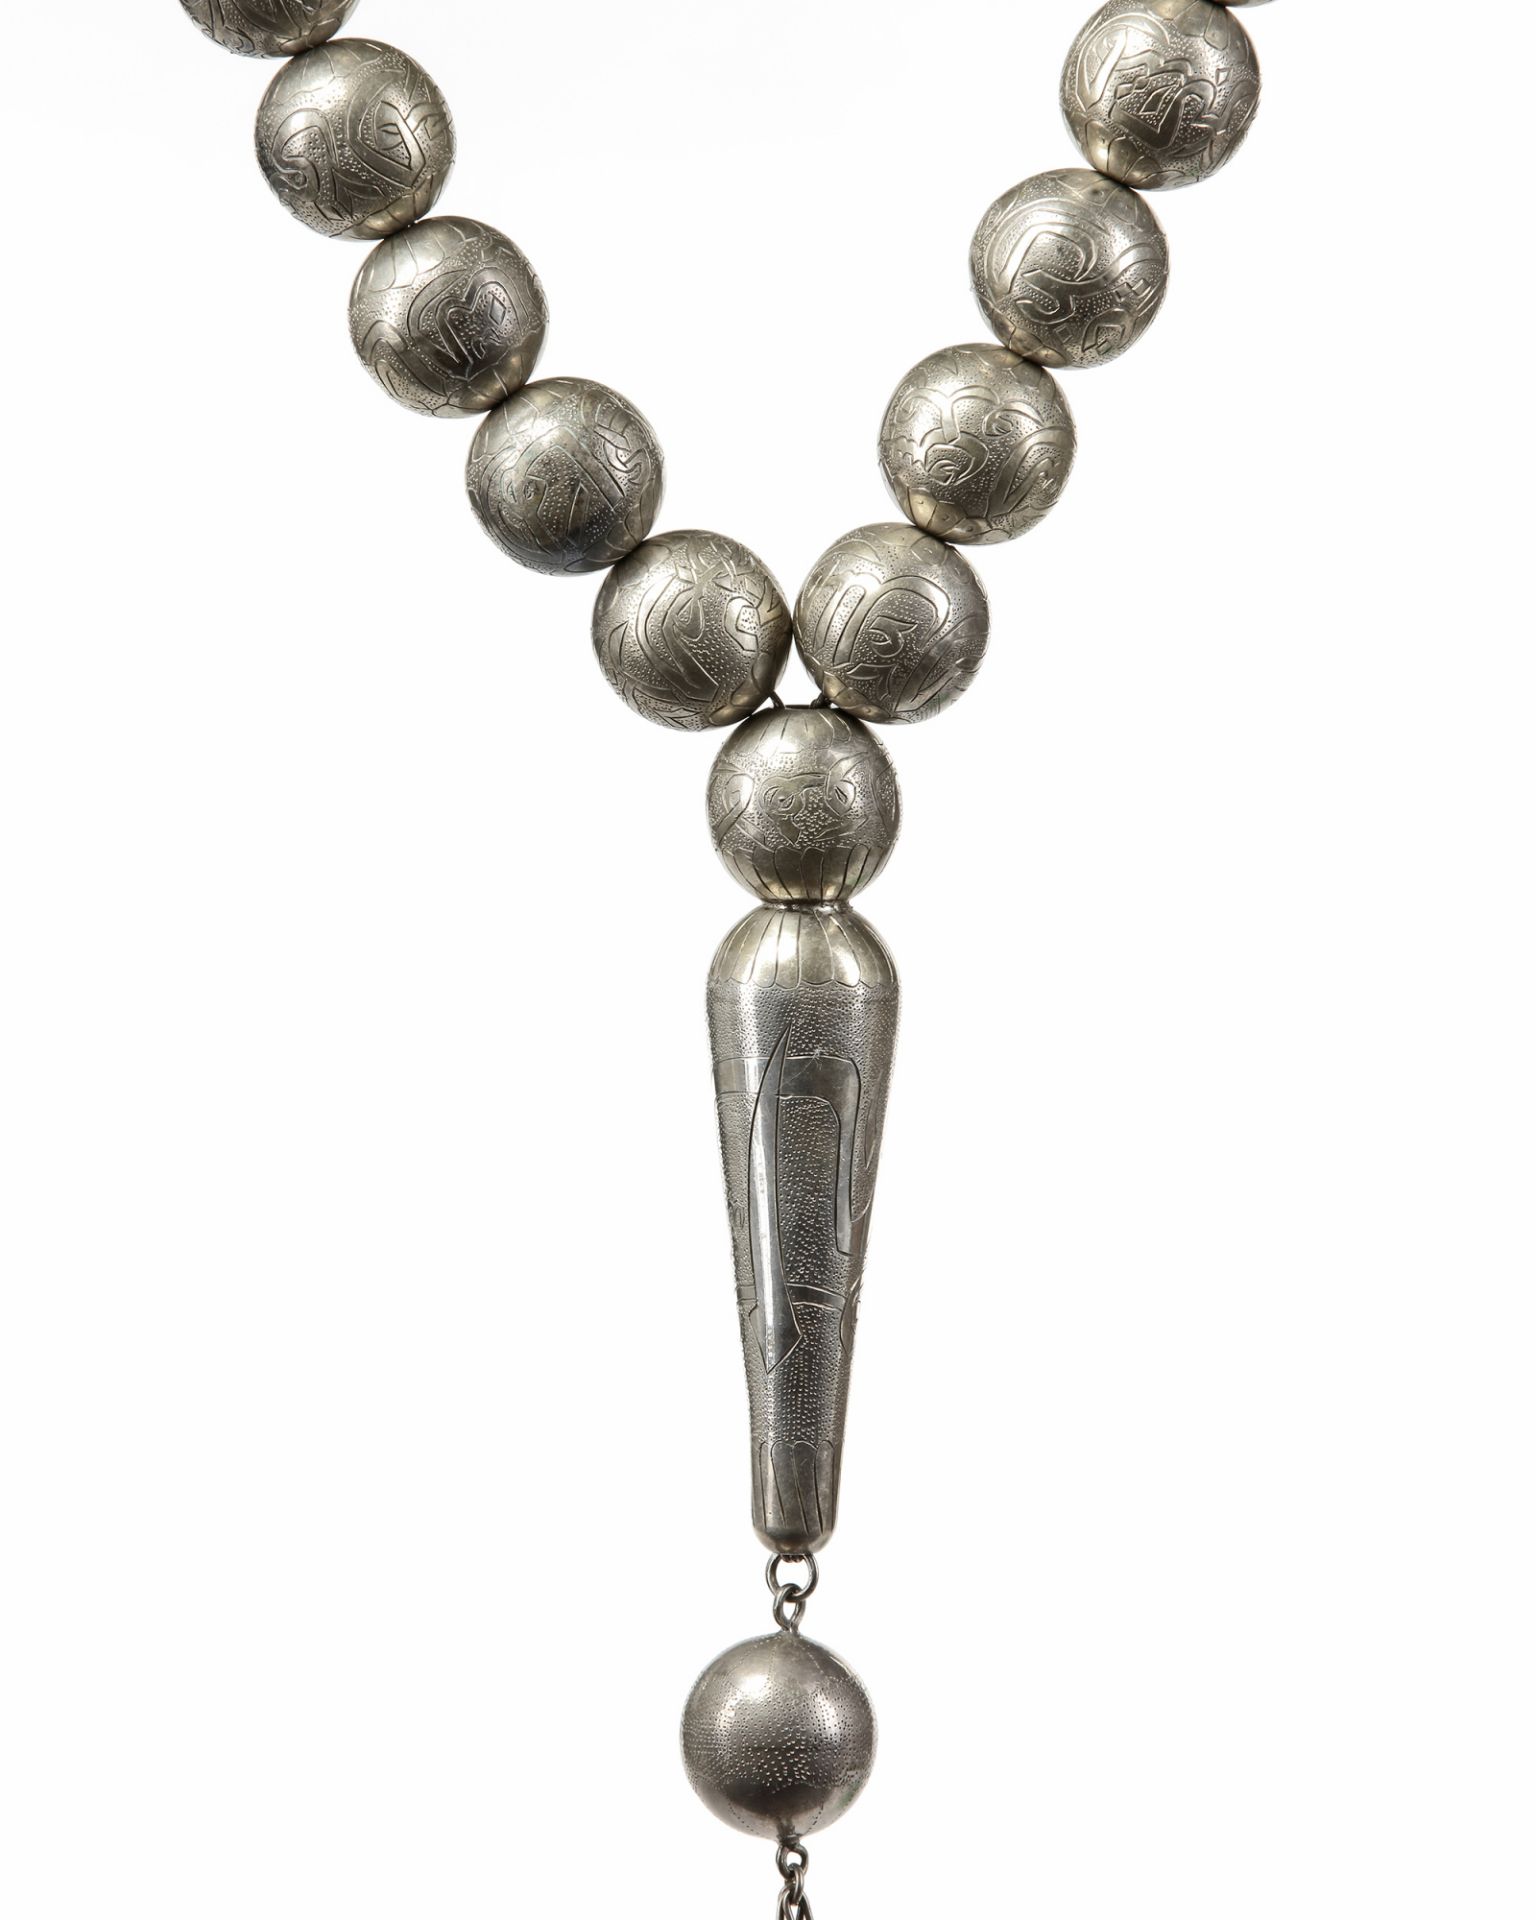 LARGE OTTOMAN SILVER PRAYER BEADS, LATE 19TH CENTURY - Image 10 of 12